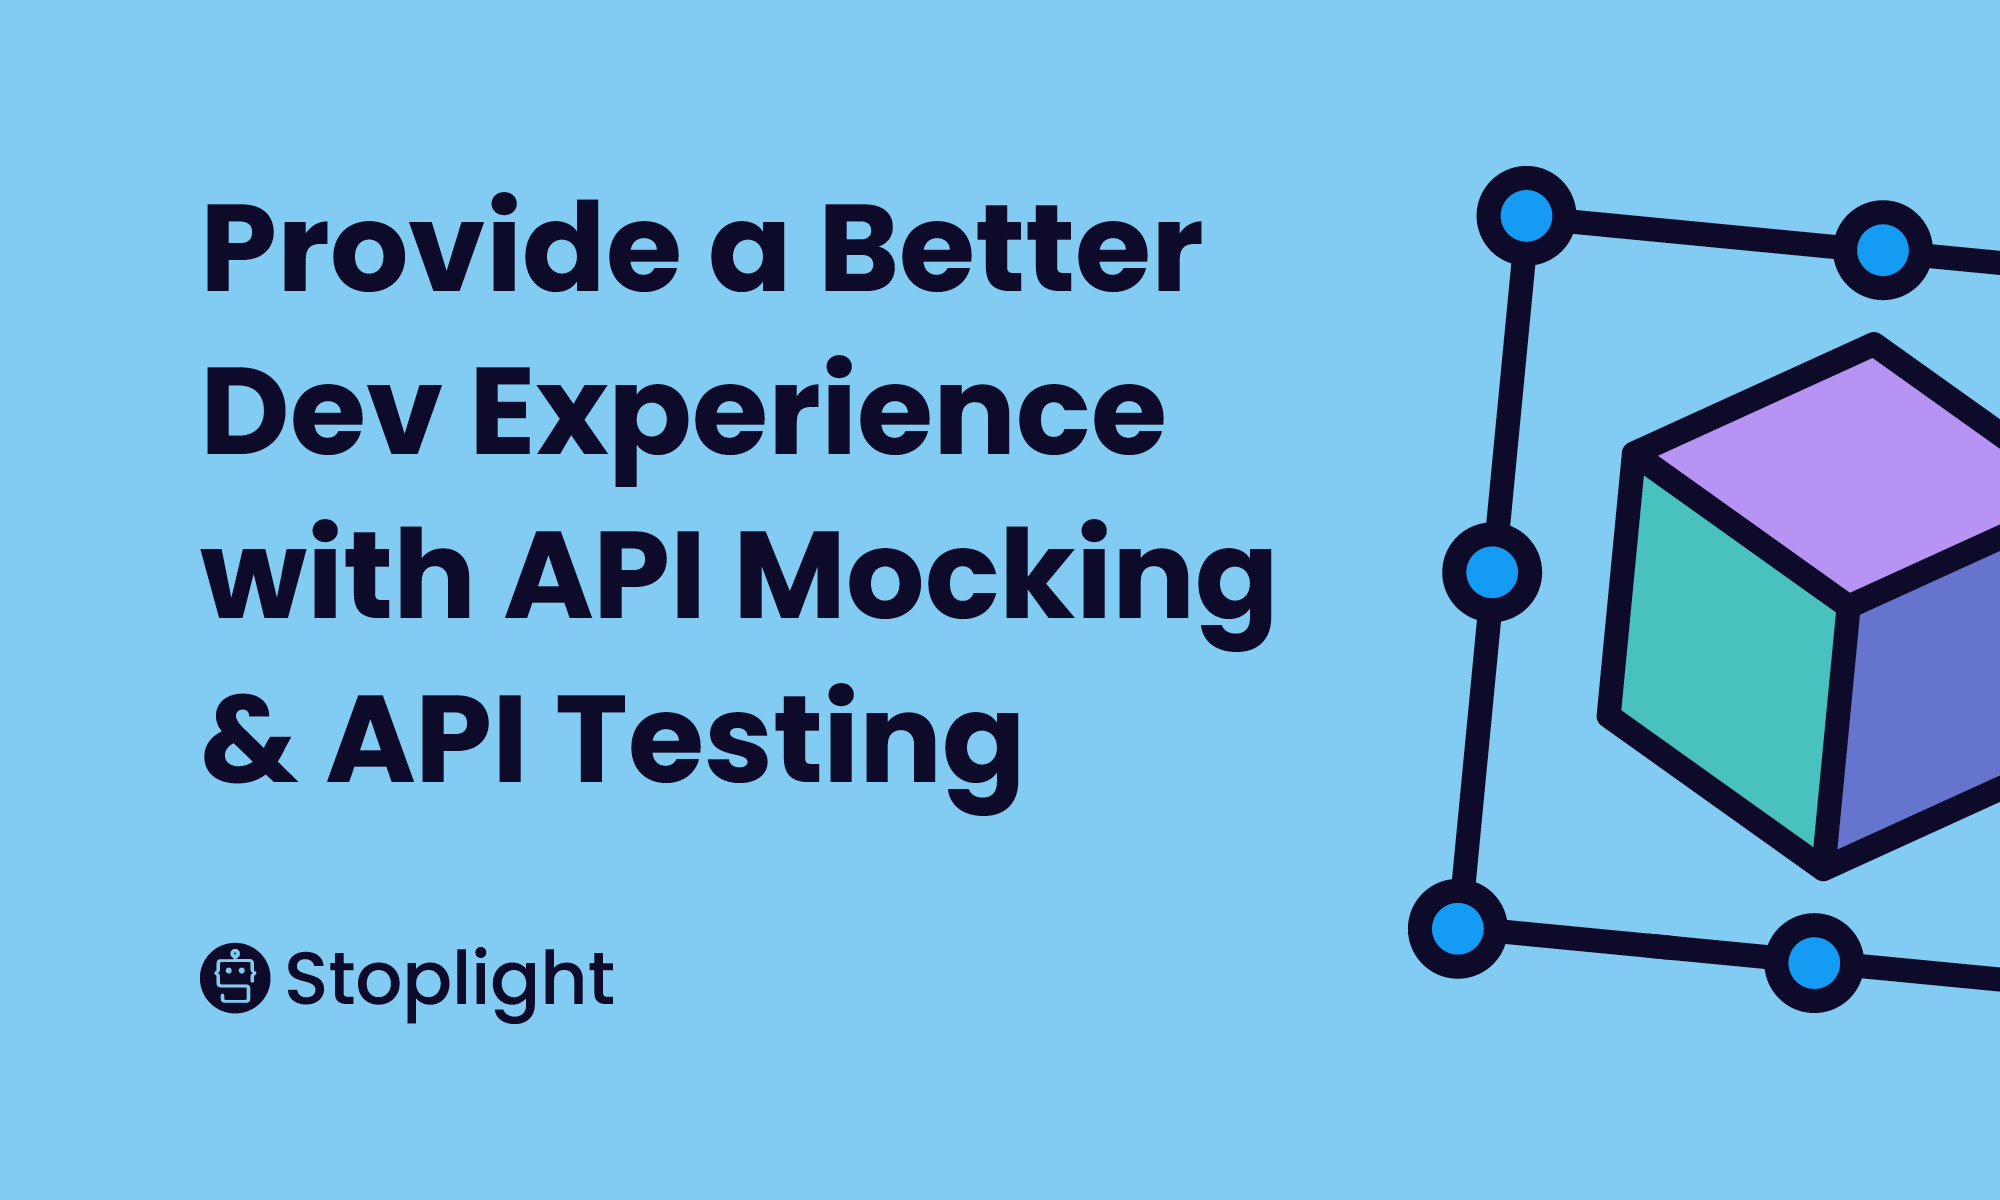 Better Developer Experience Includes API Mocking AND Testing